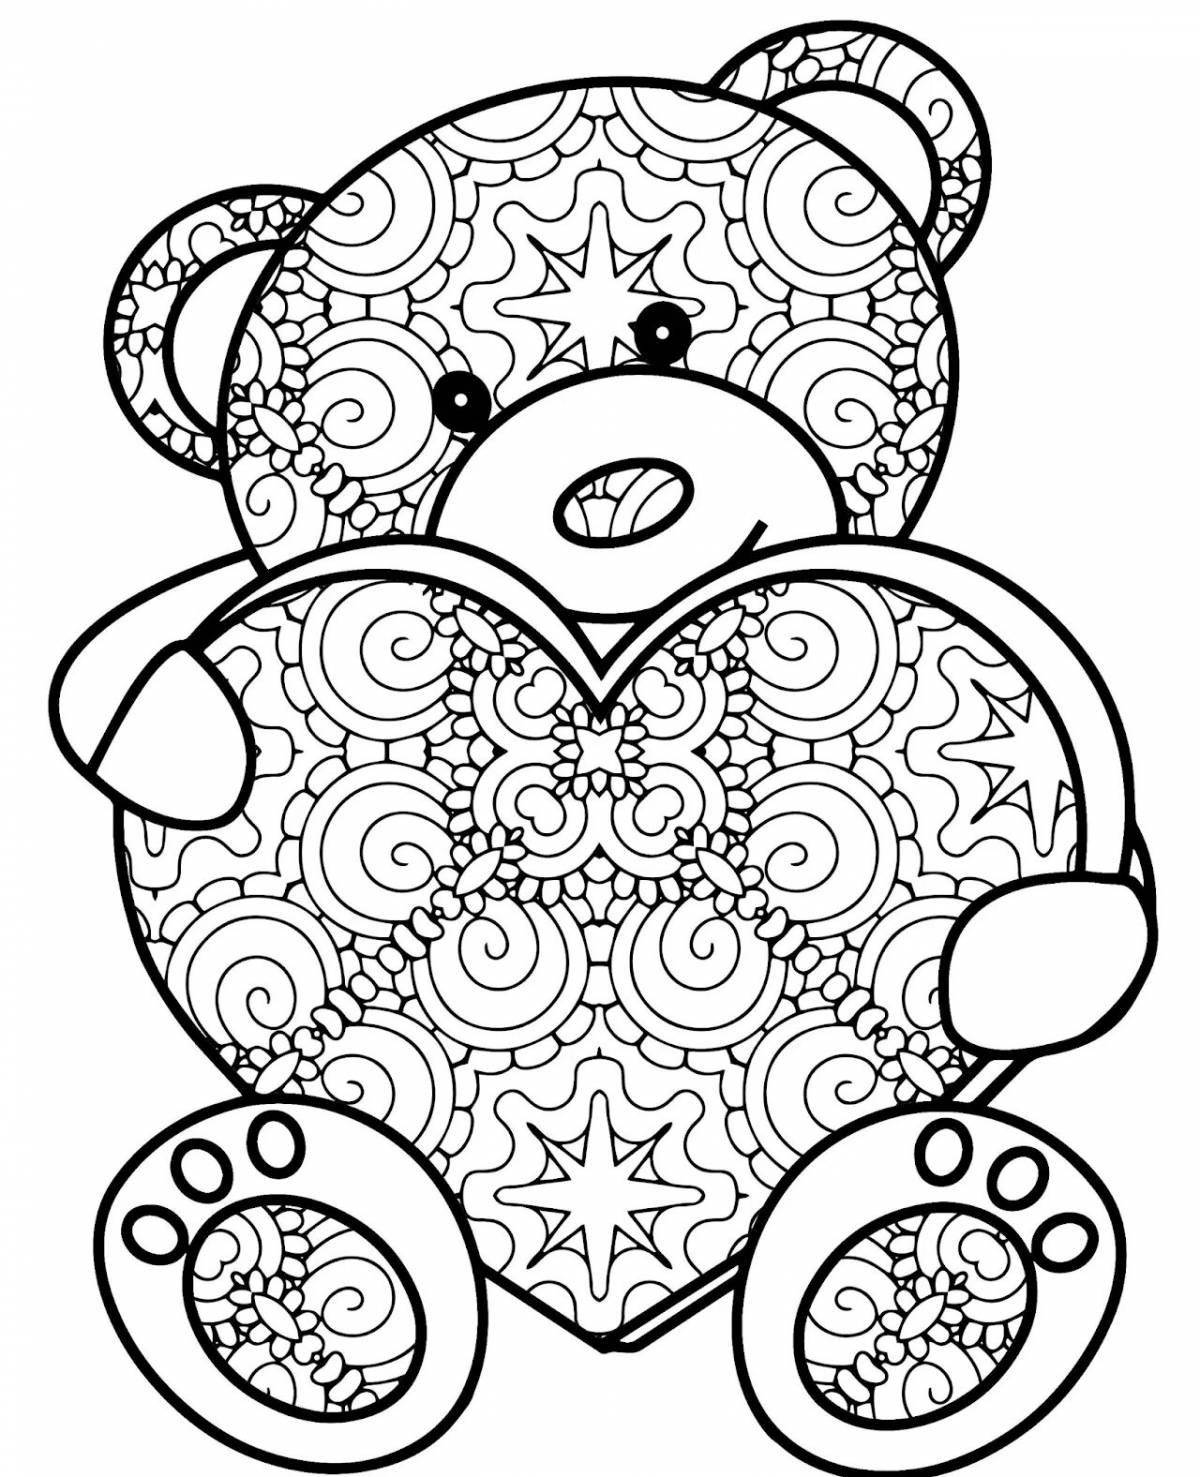 Simple dynamic coloring book for adults